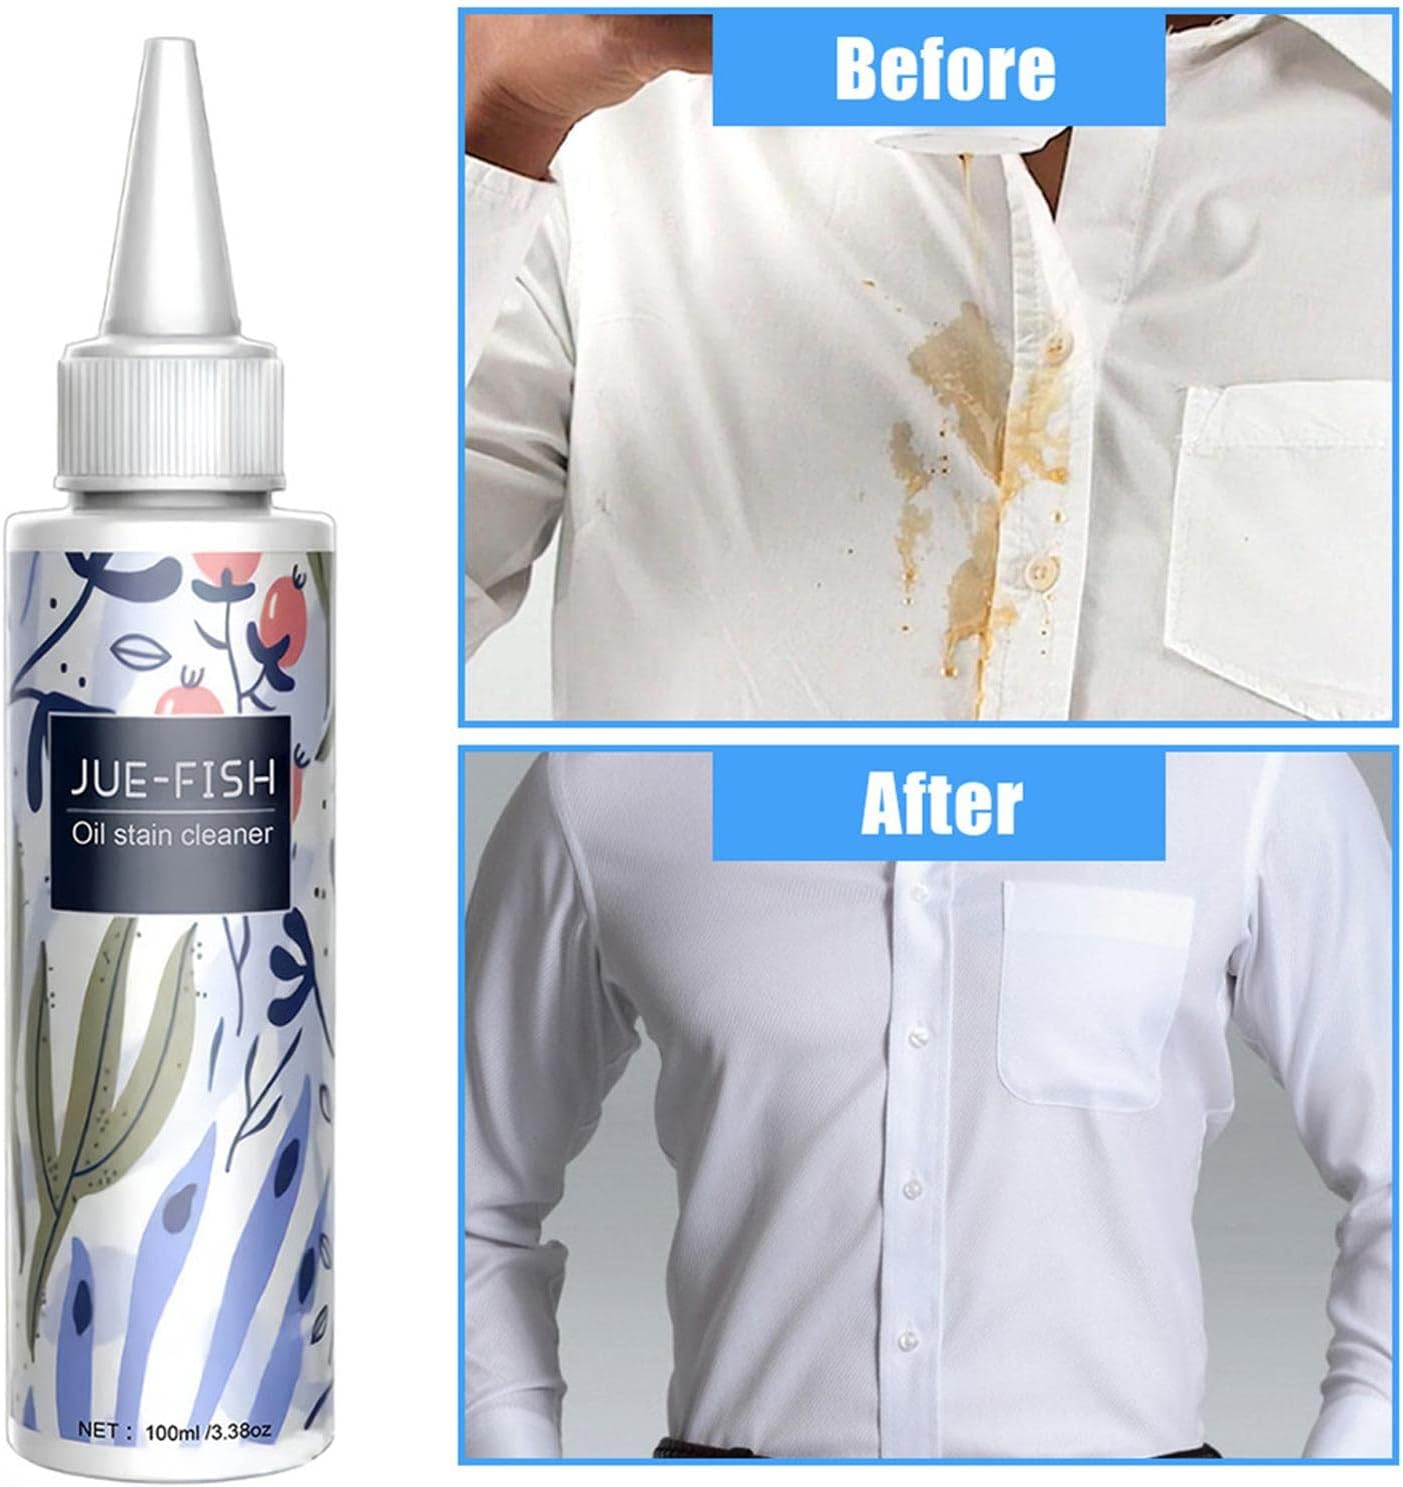 100ml Clothes Oil Stain Remover